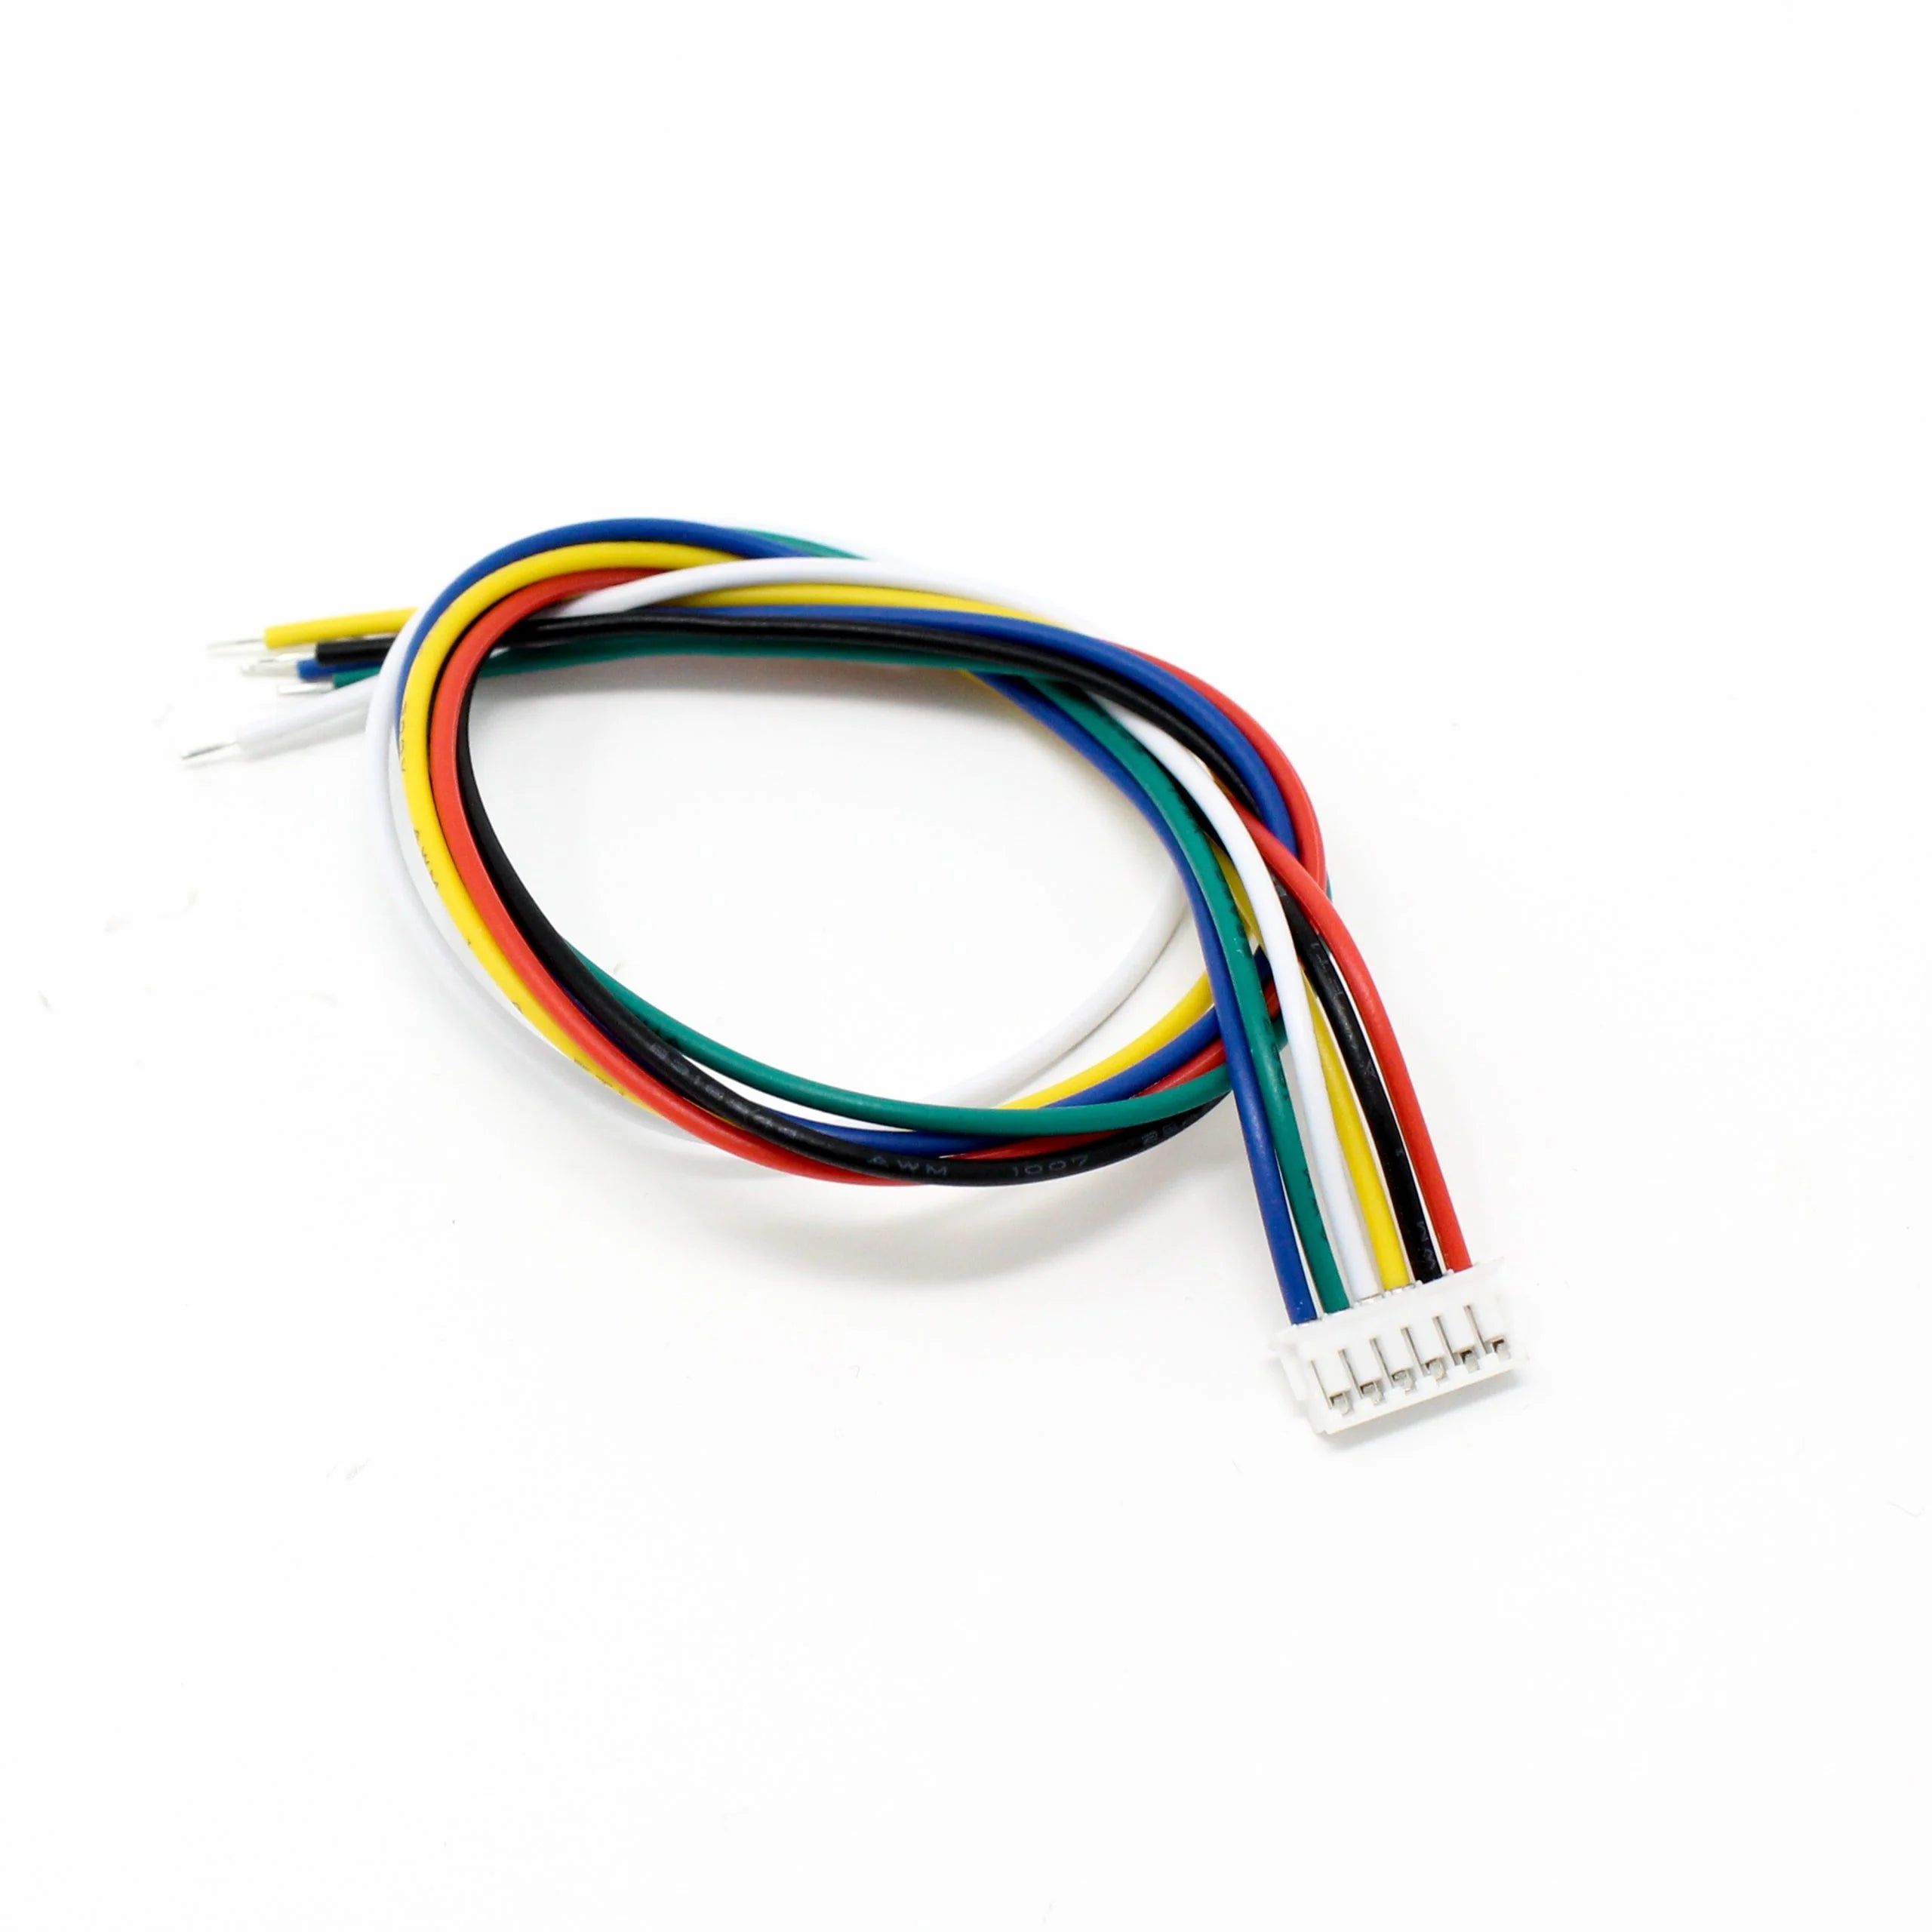 JST SH 6-pin Connectors (1.15mm pin spacing with 200mm wires)